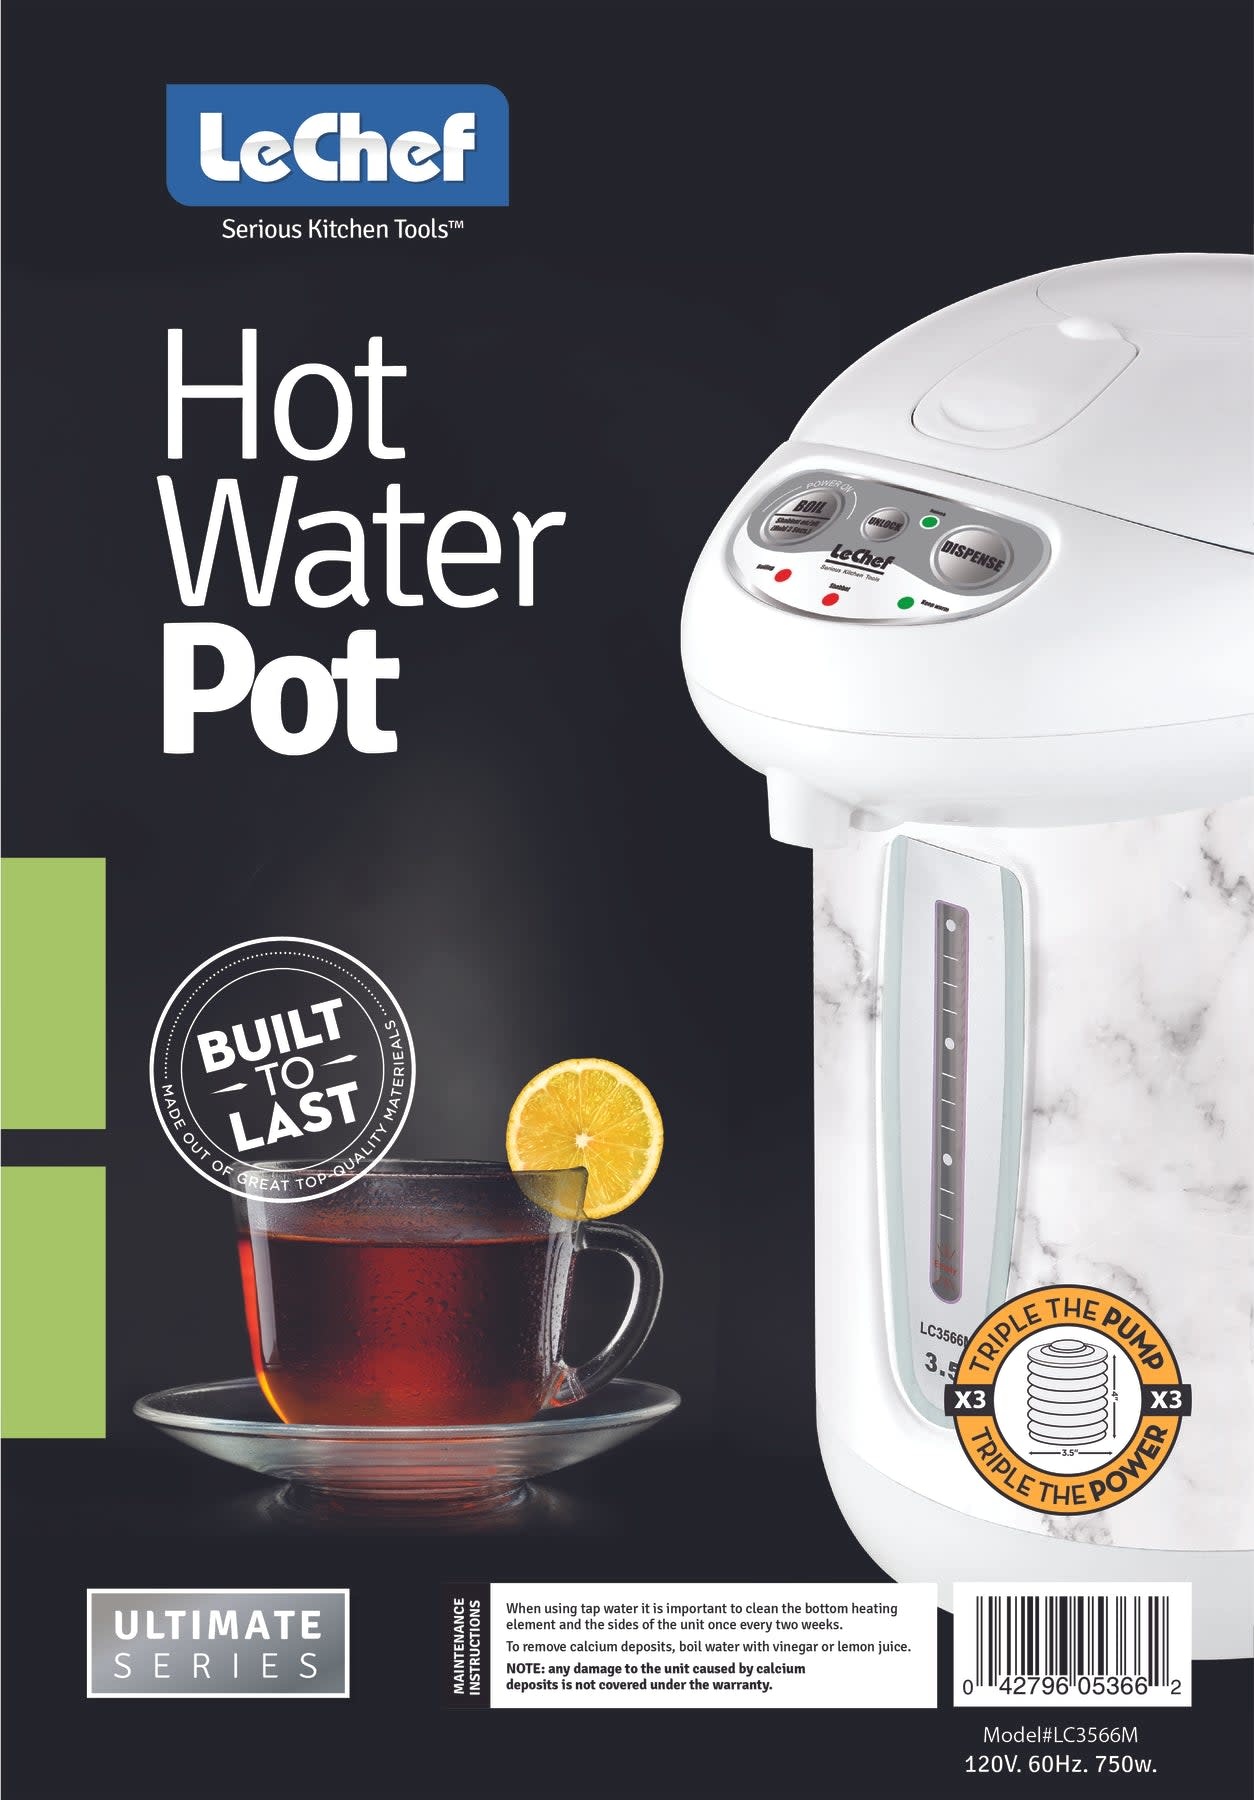 LE'CHEF ELECTRIC HOT WATER POT 4.0 QT MODEL# LC4077S WITH SHABBAT